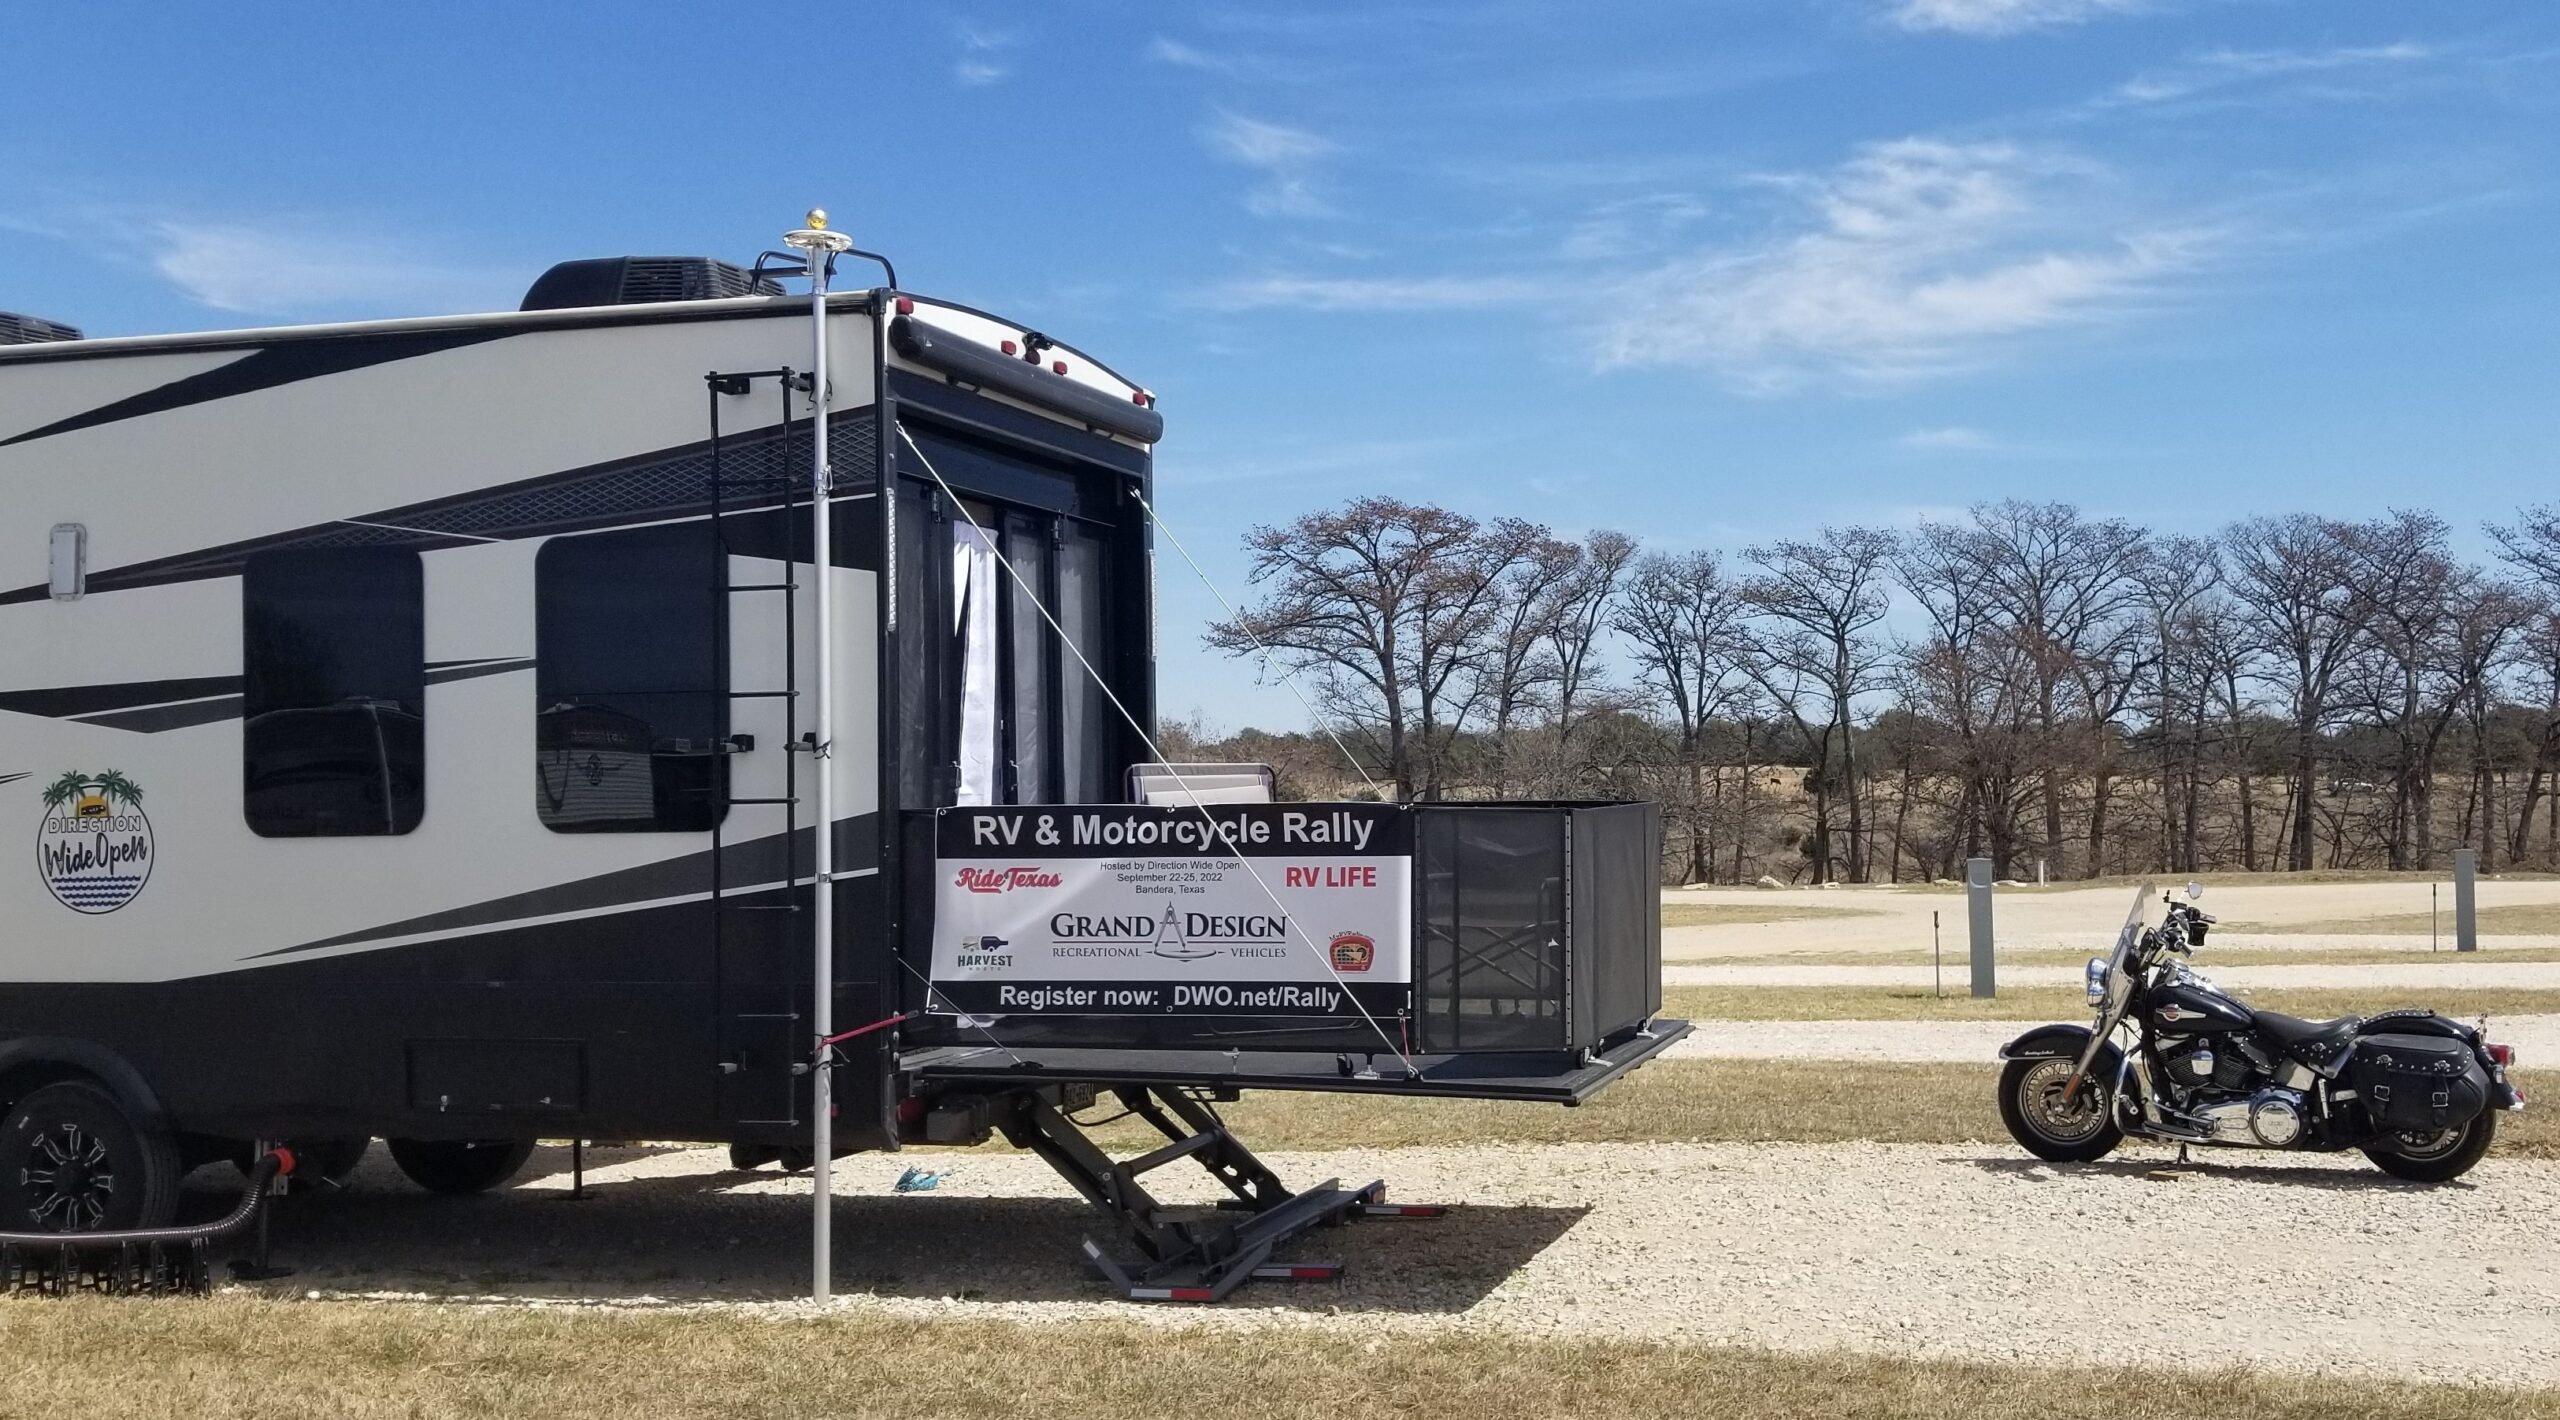 Back of Toy Hauler RV with Rally sign and motorcycle